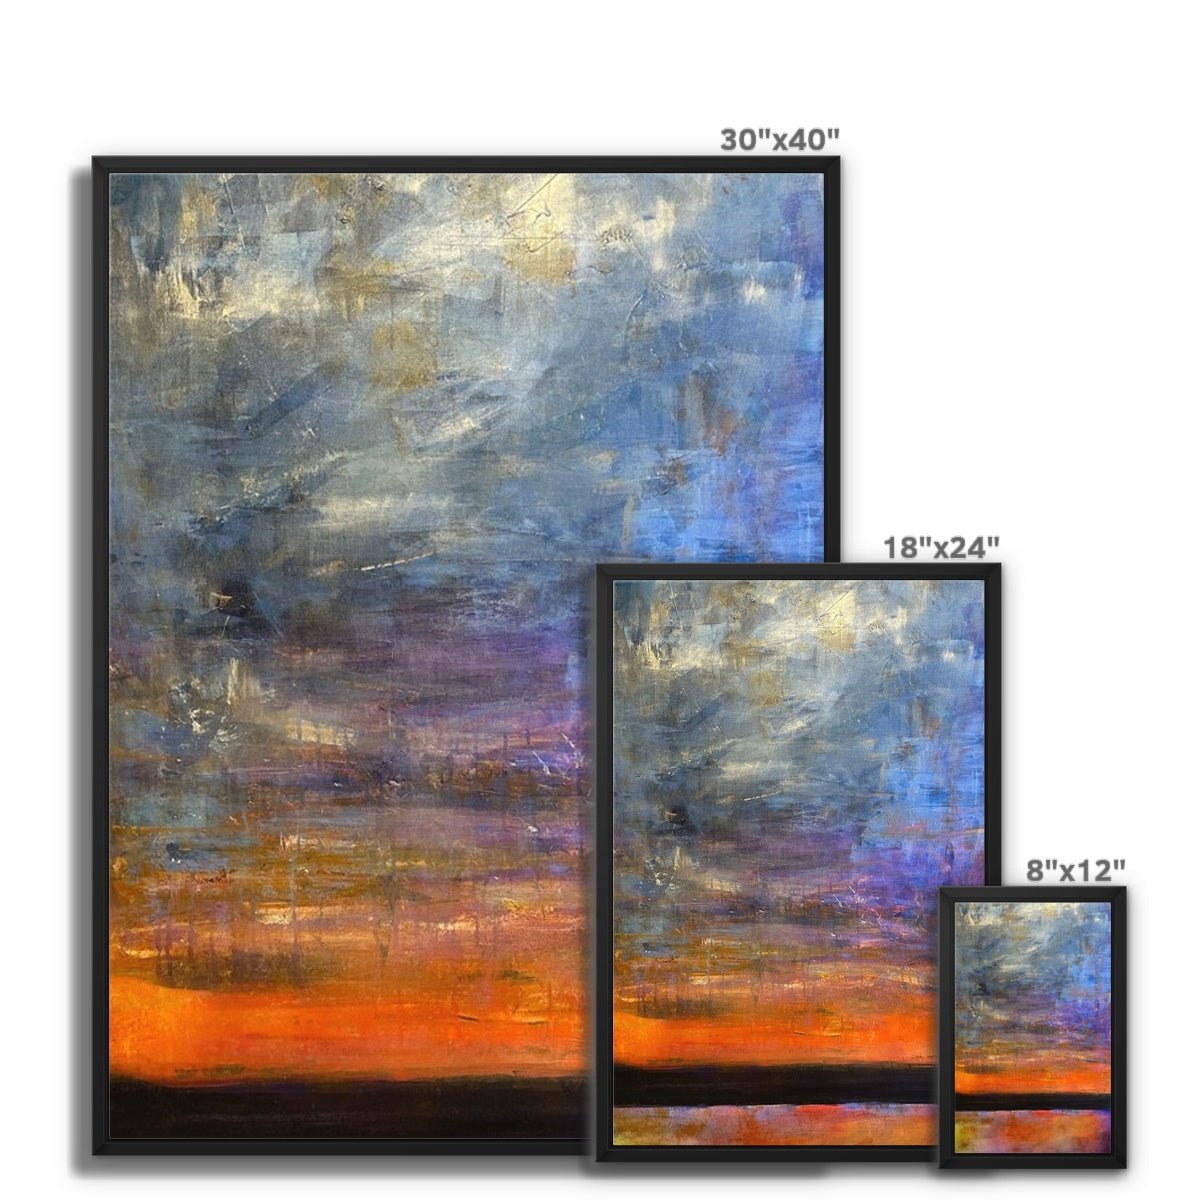 Horizon Dreams Abstract Painting | Framed Canvas From Scotland-Floating Framed Canvas Prints-Abstract & Impressionistic Art Gallery-Paintings, Prints, Homeware, Art Gifts From Scotland By Scottish Artist Kevin Hunter